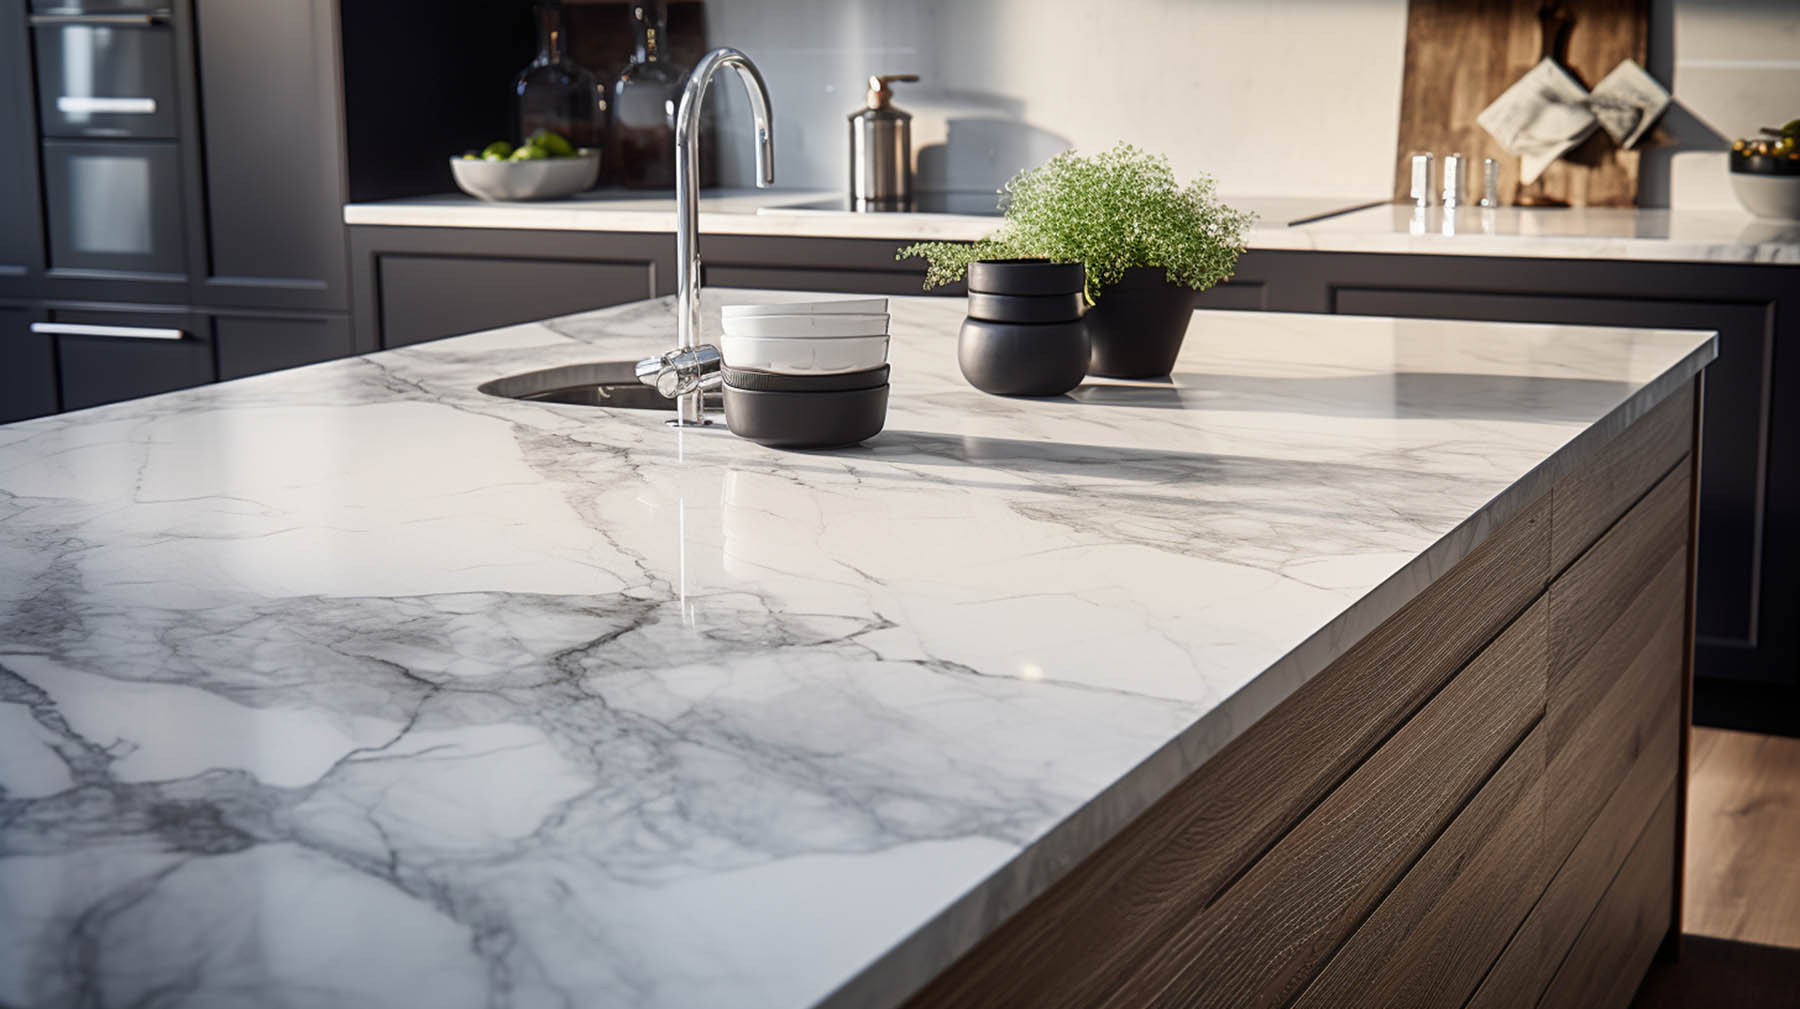 Alabaster Kitchen Cabinets: A Touch of Timeless Beauty